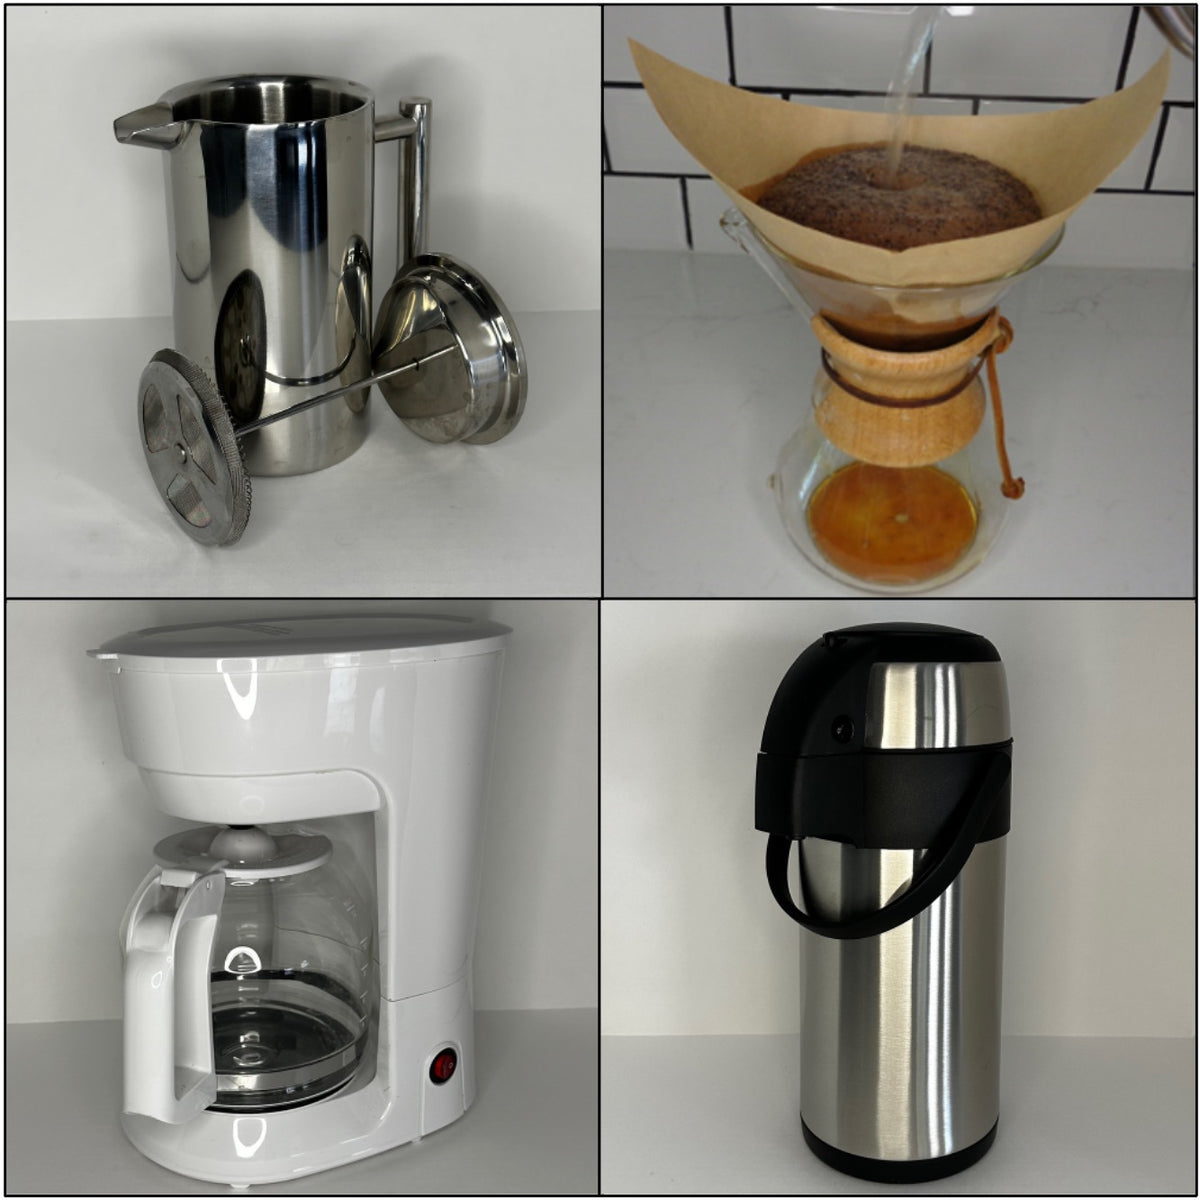 Picture collage of French press, Chemex, auto-drip maker and insulated carafe